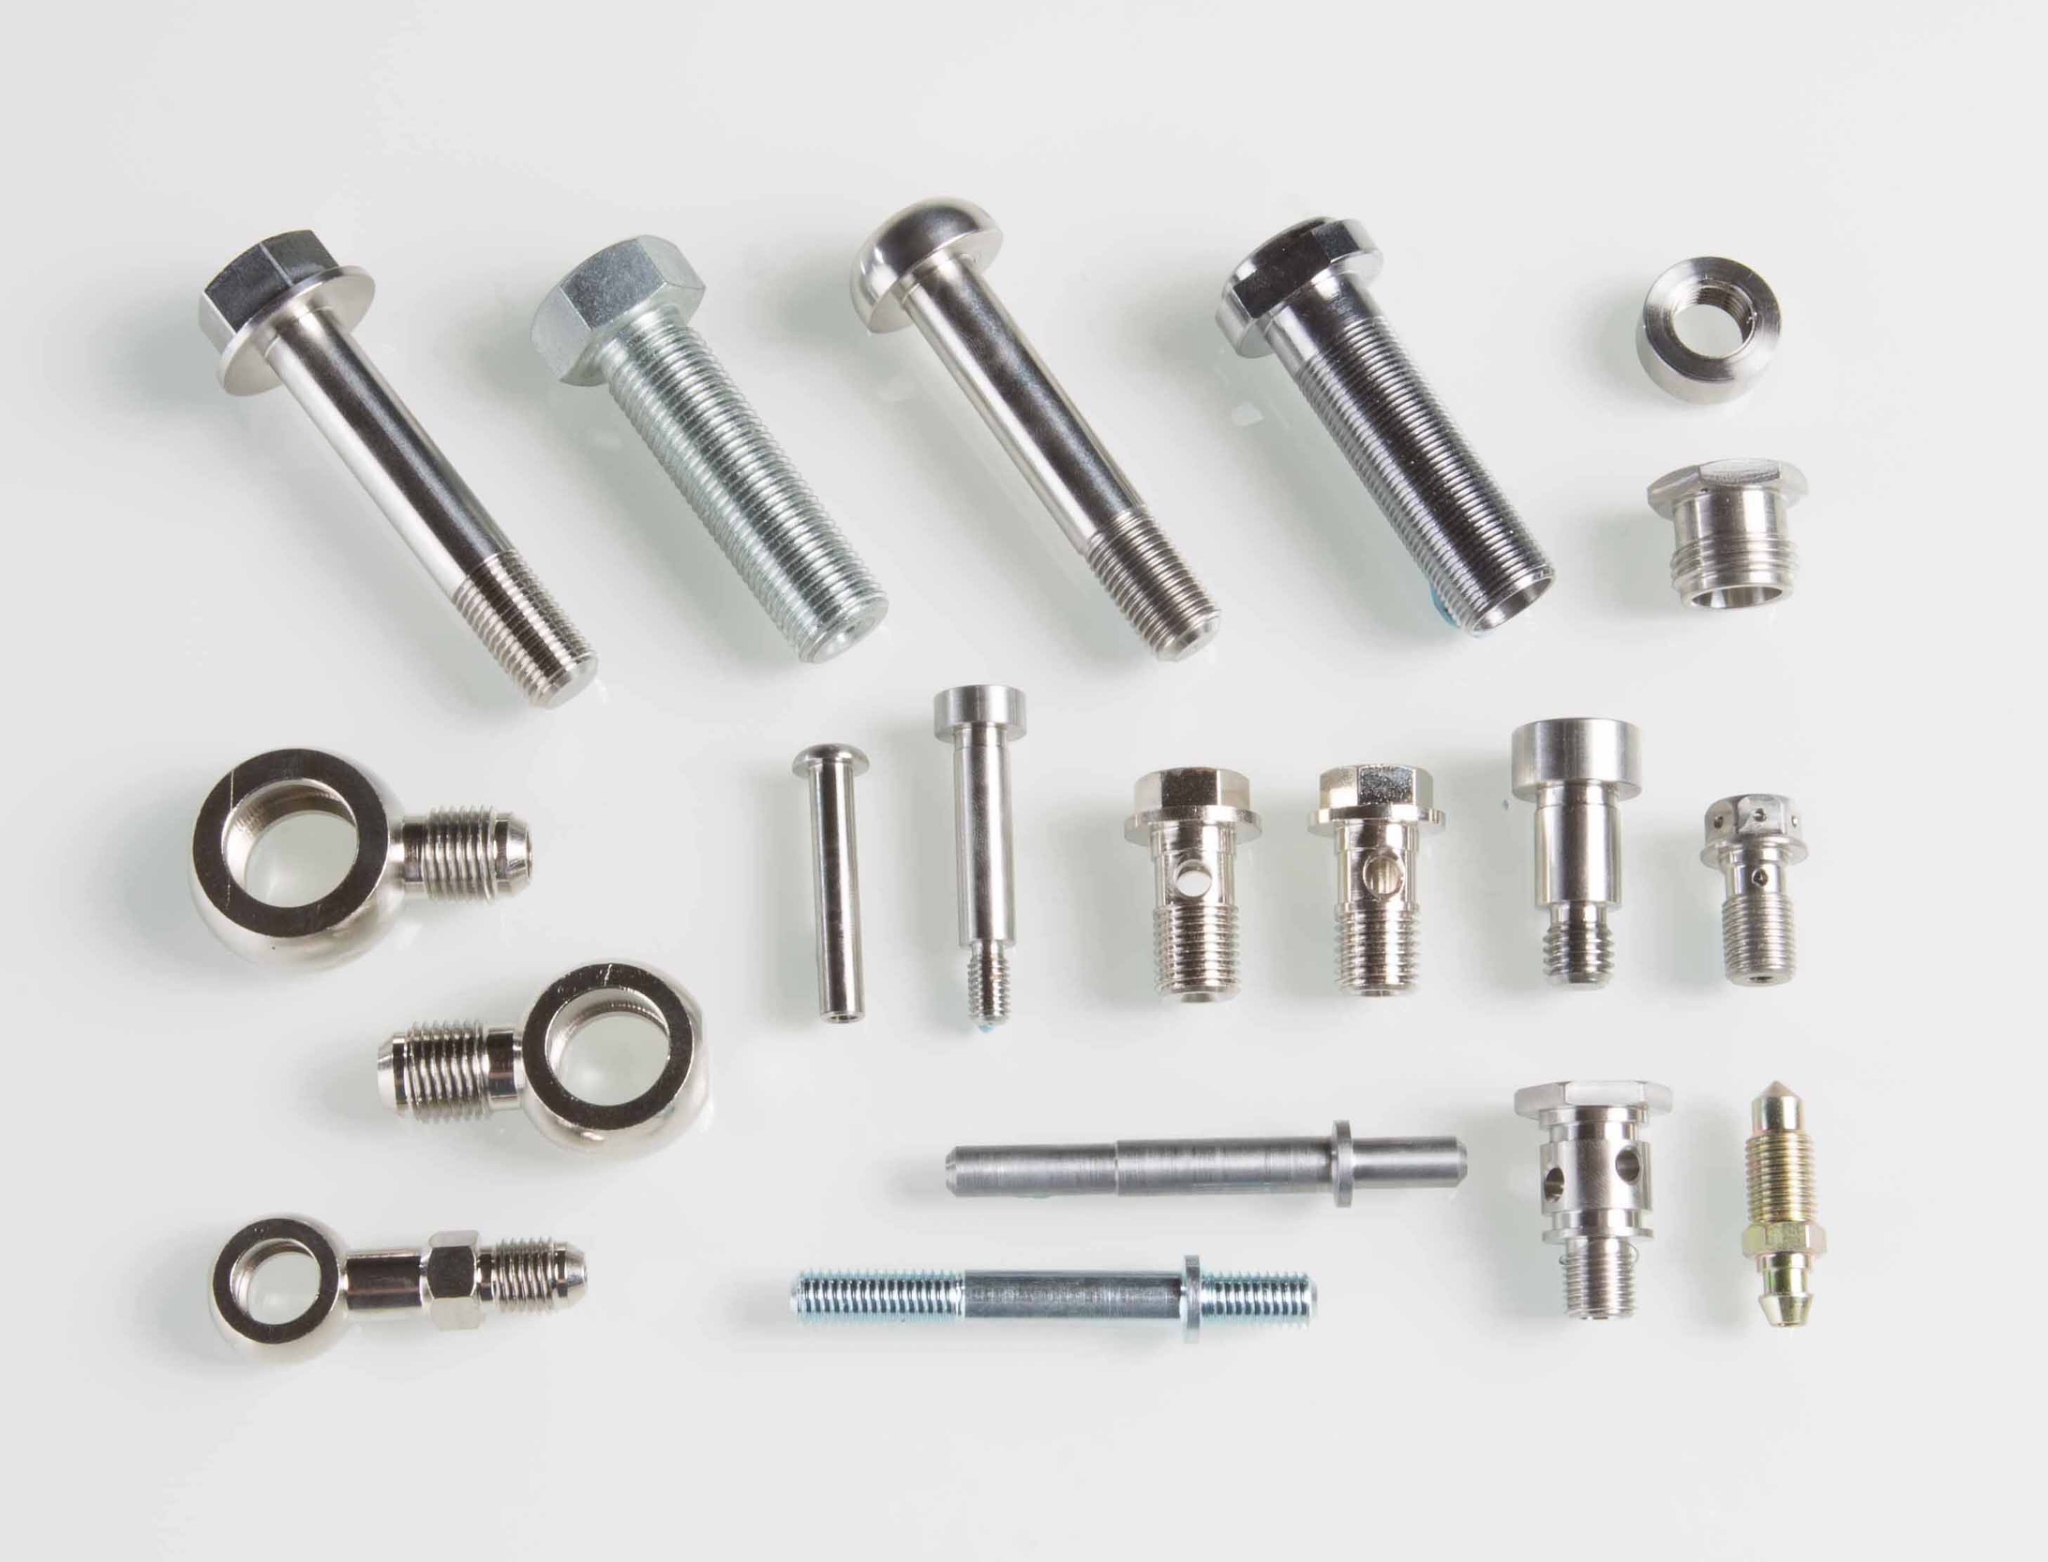 CNC customized special screws/nuts/banjo fitting